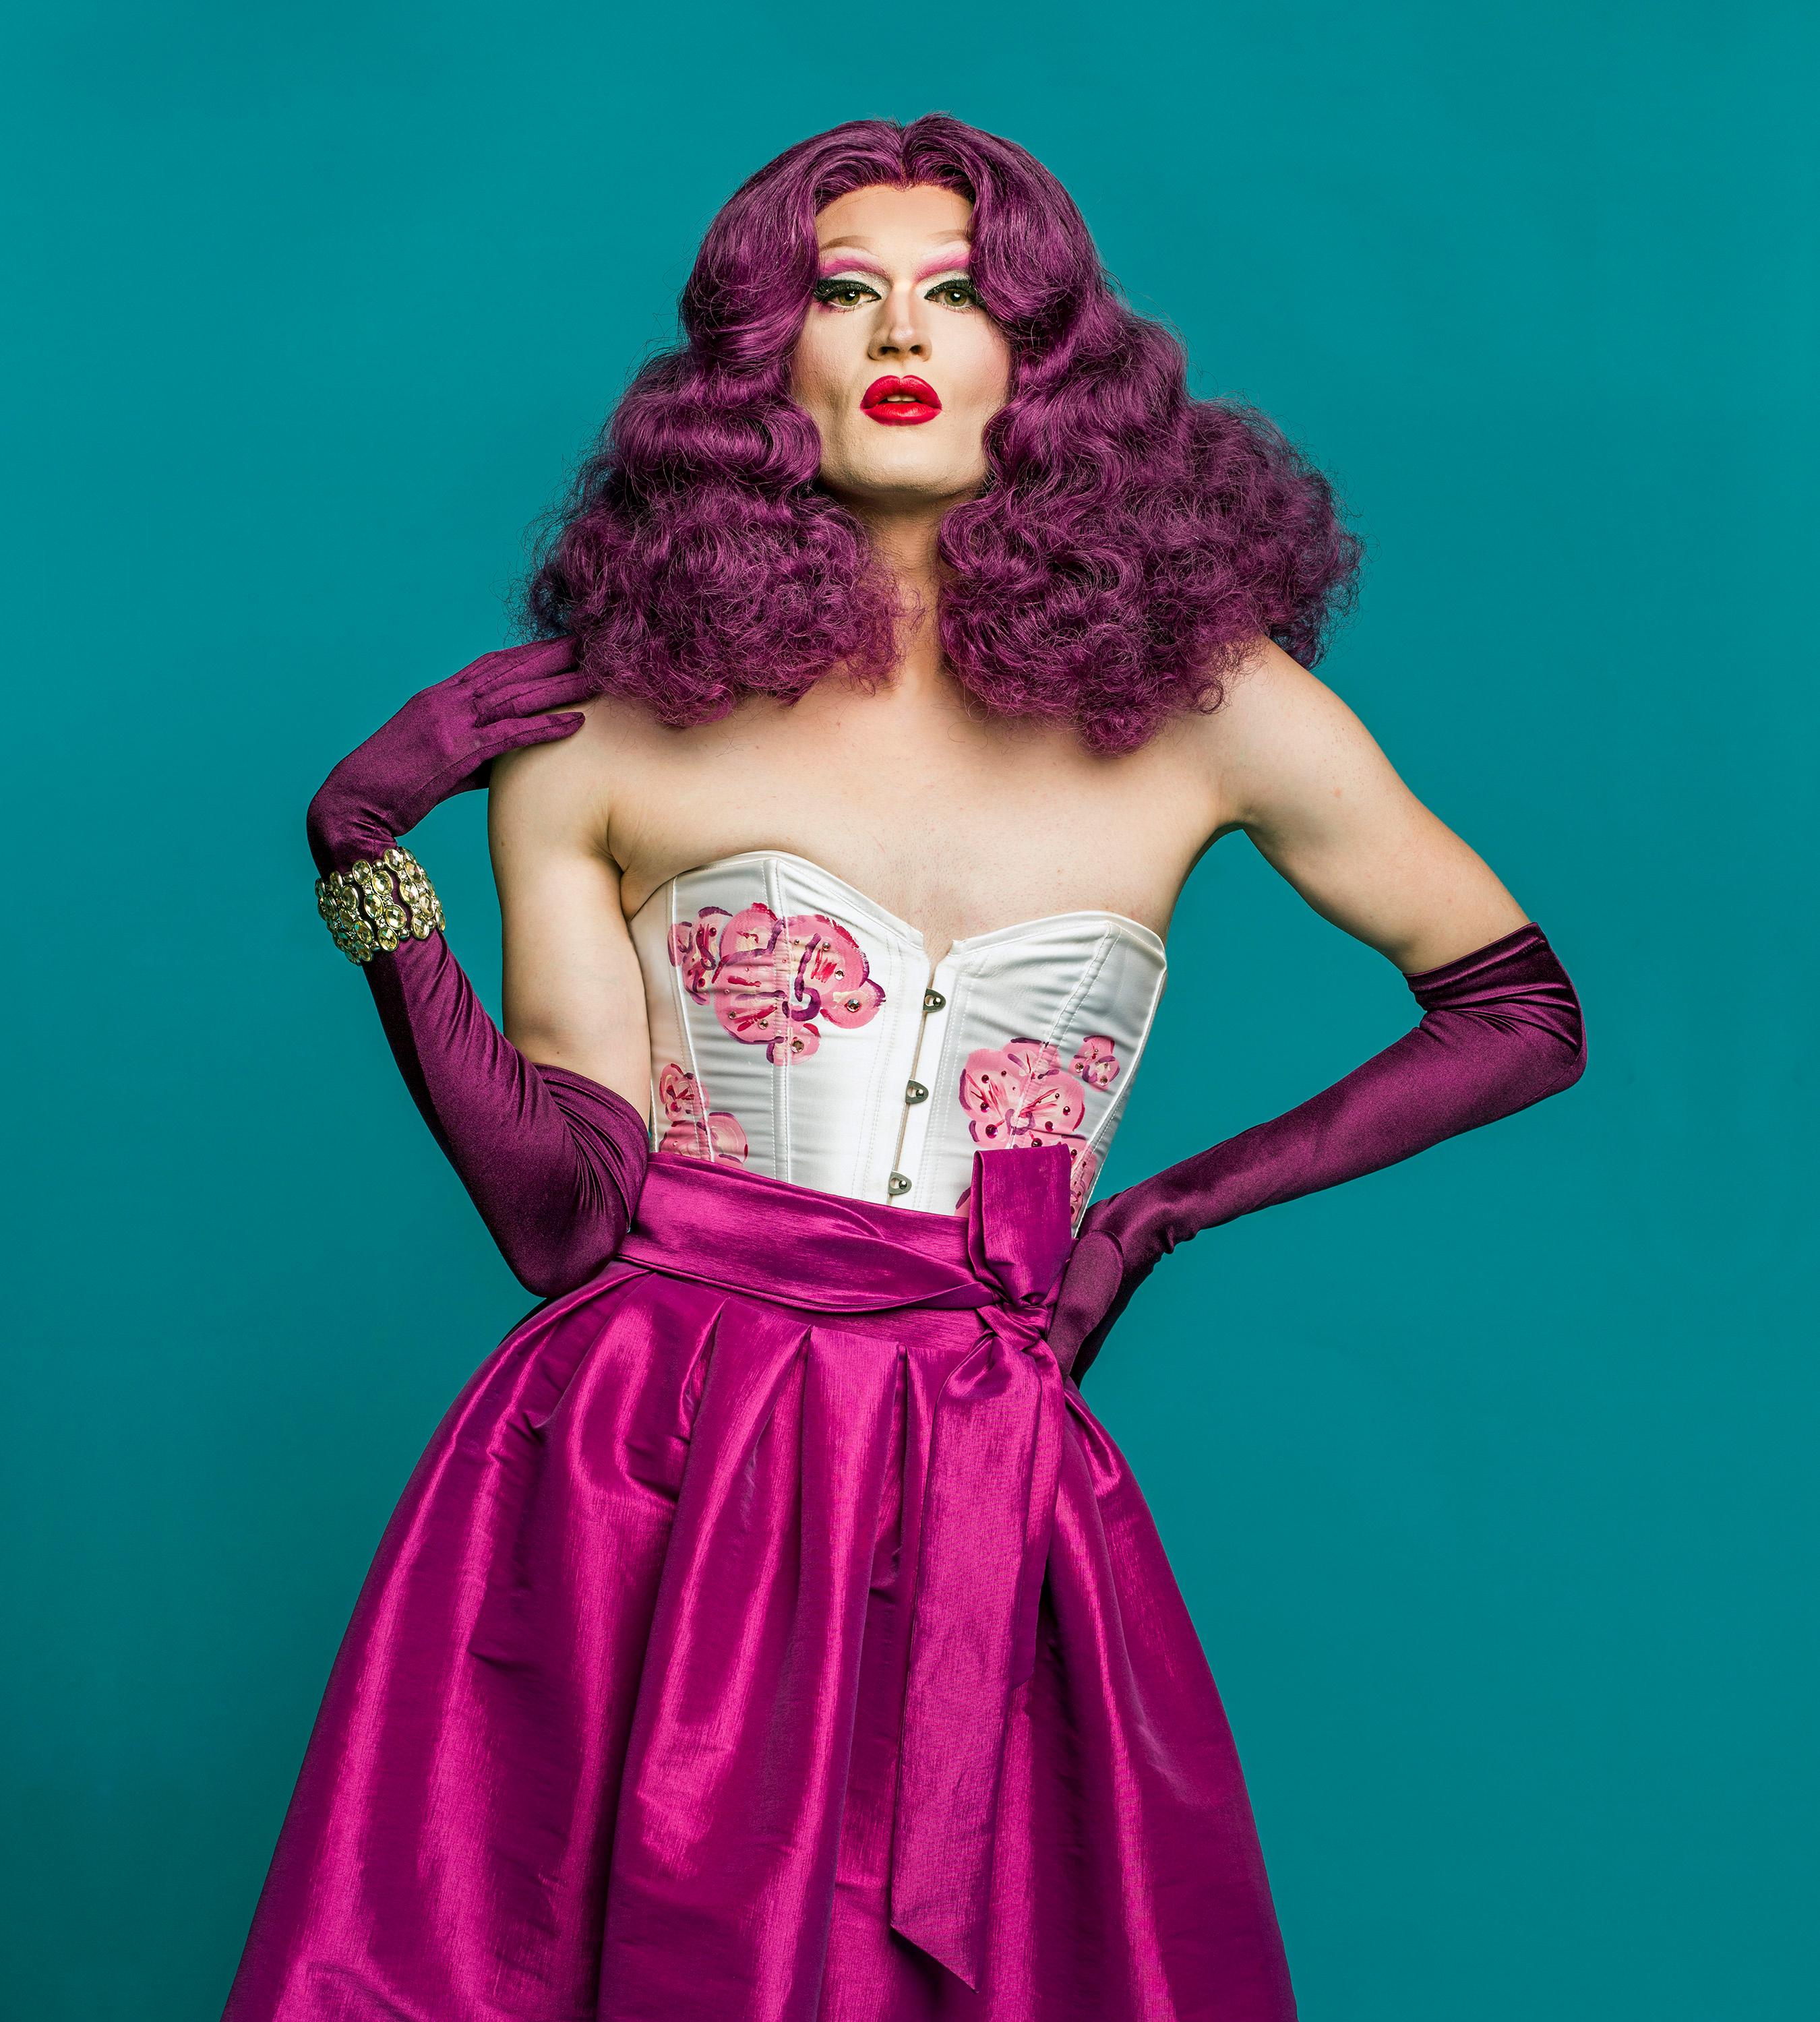 "Or Chid" - Southern Portrait Photography - Drag Queen